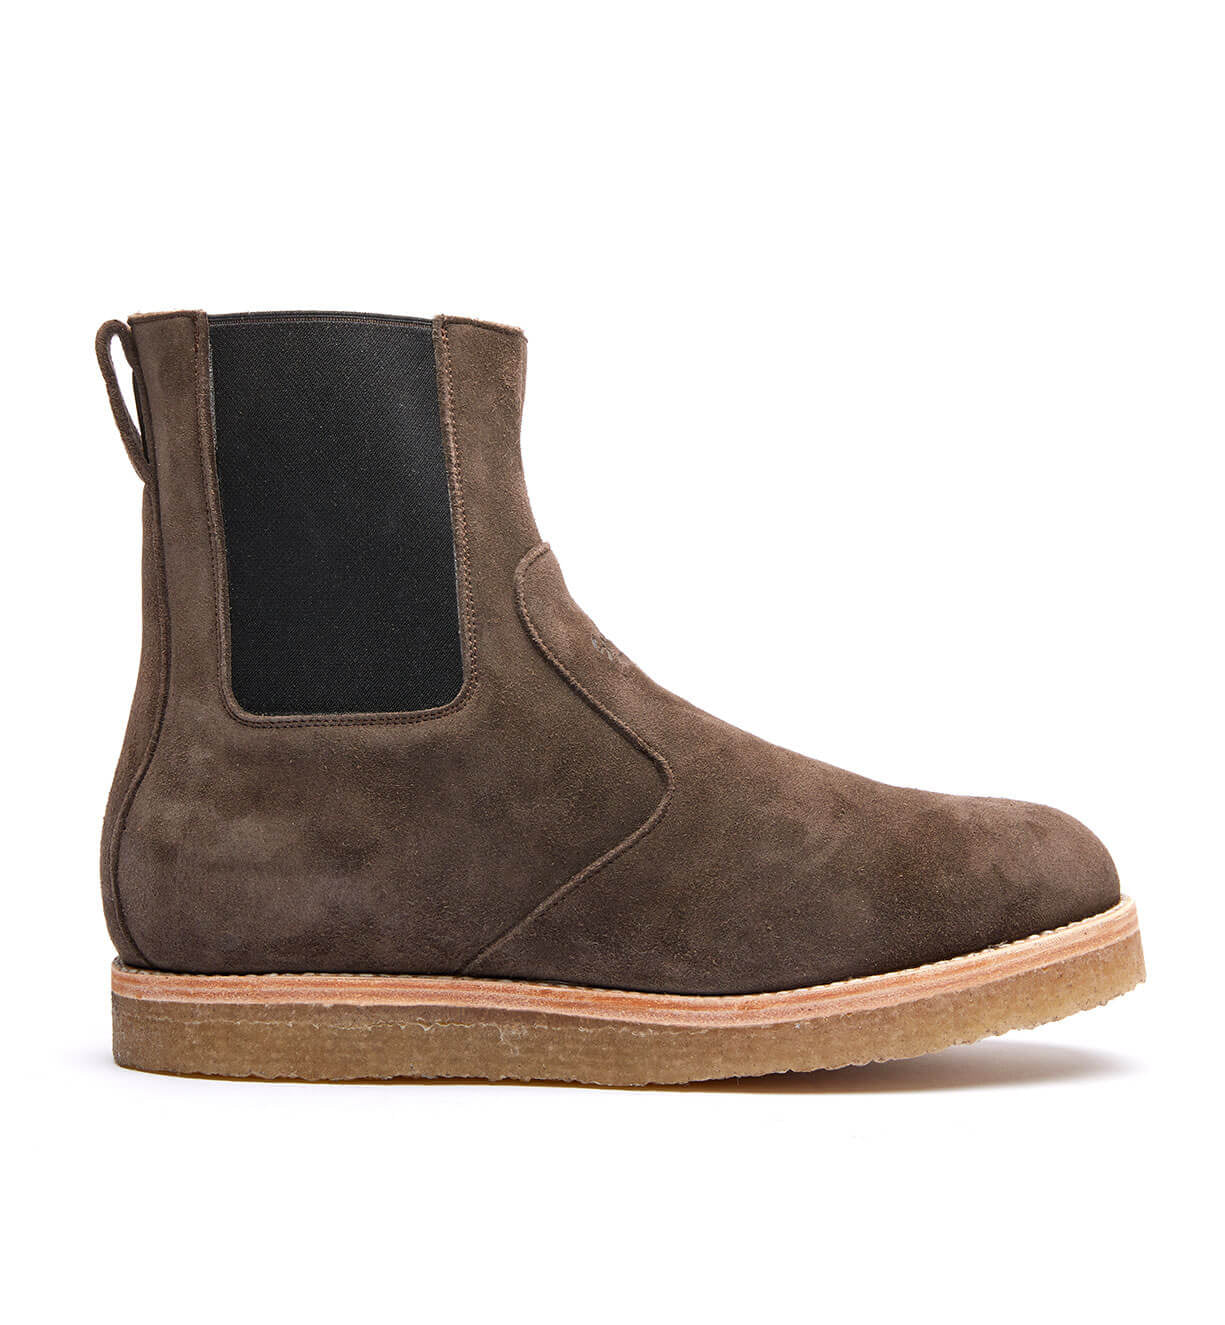 A single brown suede Stamford Boot Peanut Kudu Chelsea boot with elastic side panels and a Goodyear welt, isolated on a white background by Santa Rosa Brand.